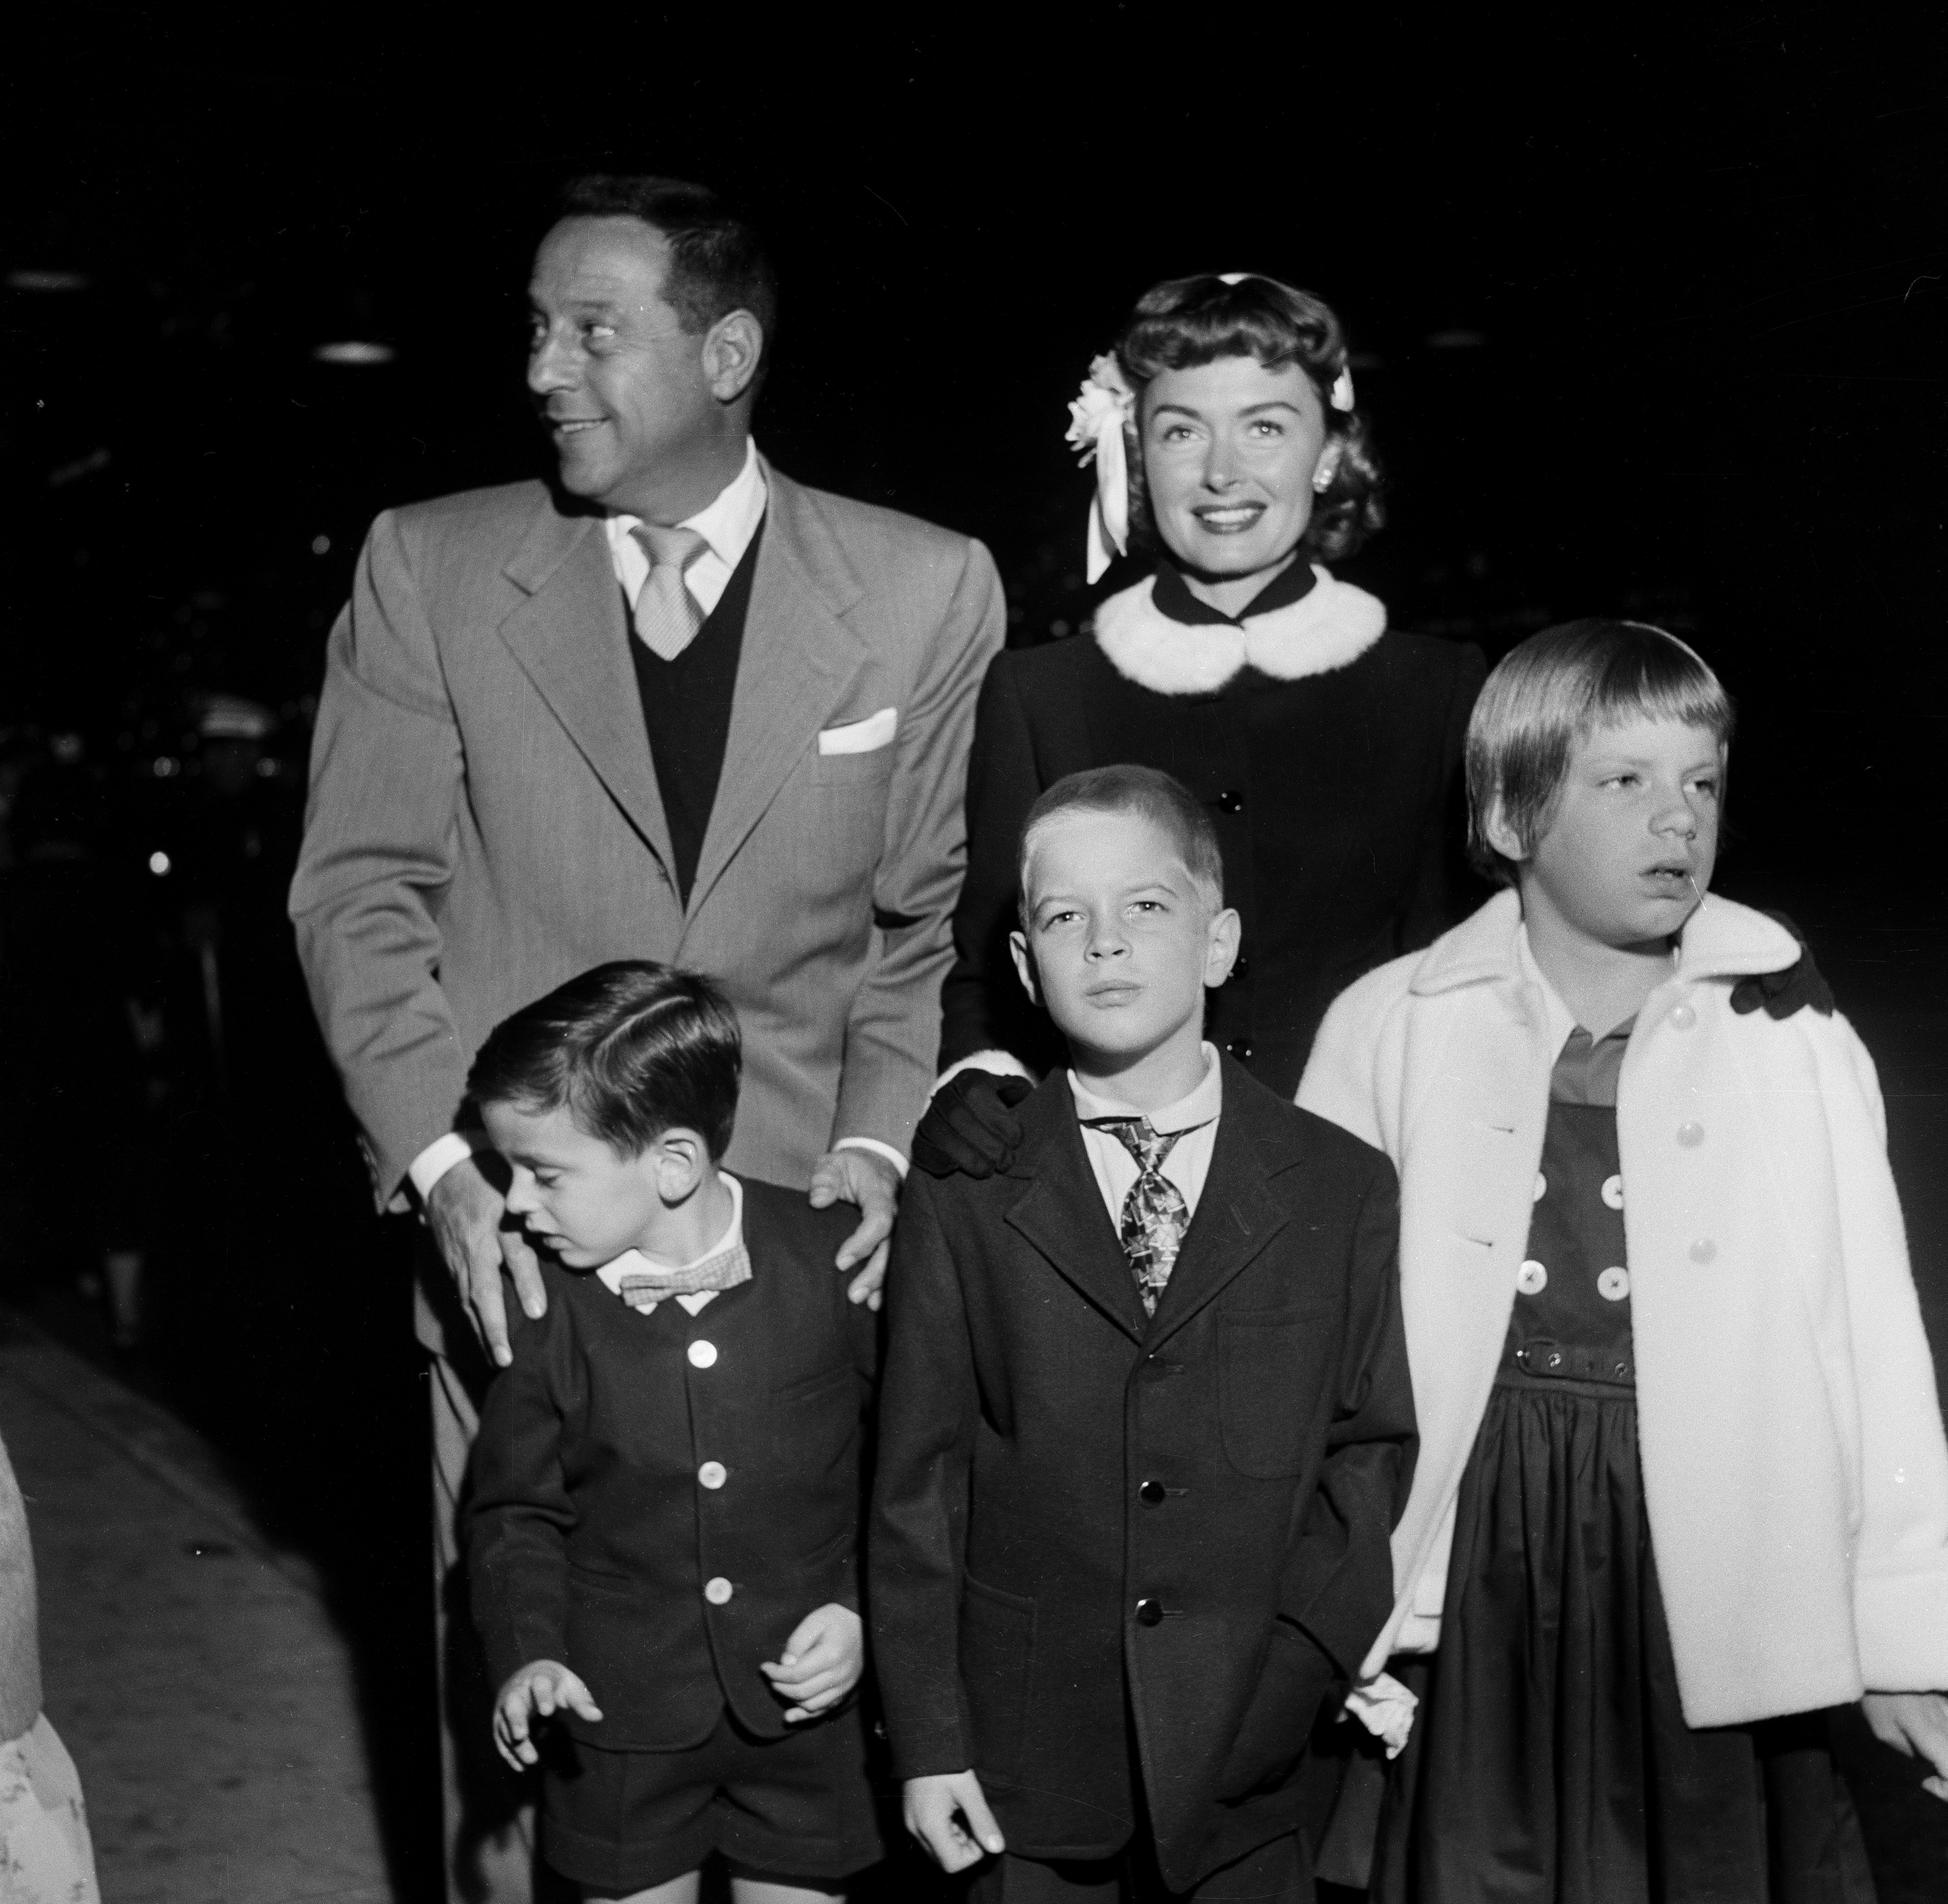 Actress Donna Reed with husband Tony Owens attend a premiere with their kids Timmy, 5, Tony Jr., 7, and Penny, 8, in Los Angeles, California, on December 18, 1954, | Source: Getty Images